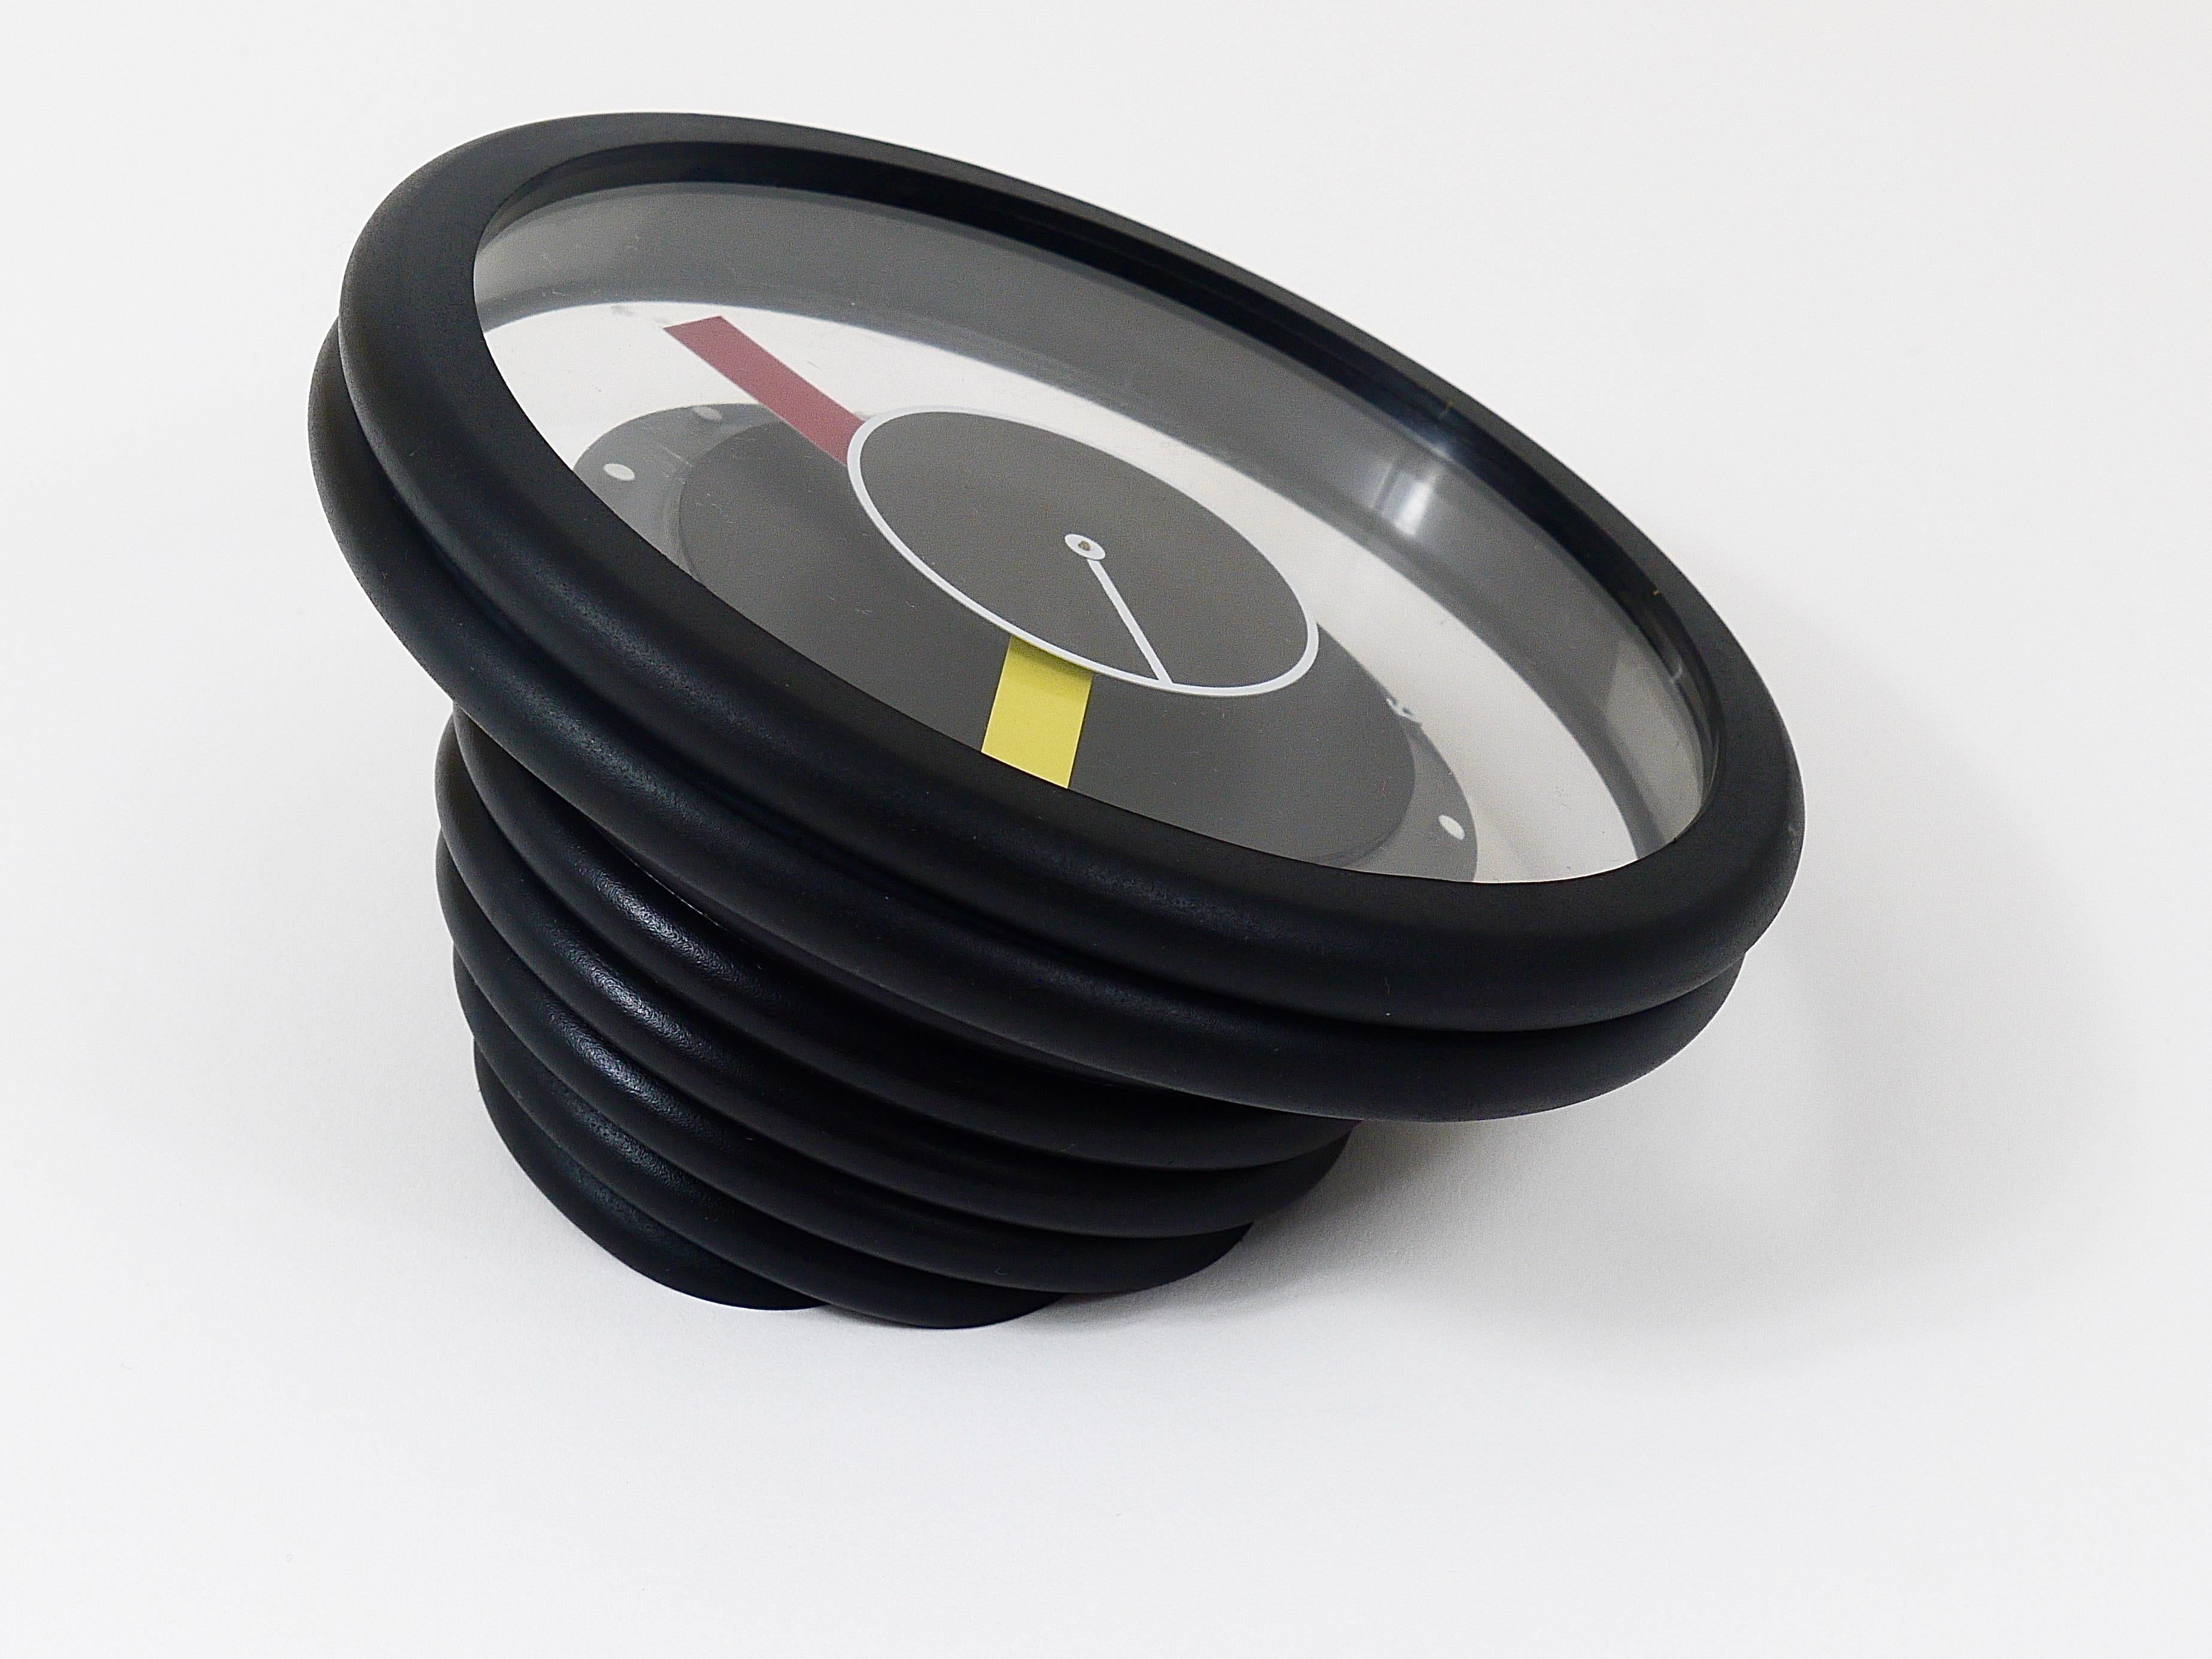 Postmodern Round Pop Art Desk or Table Clock, Memphis Milano Style, Italy, 1990s For Sale 13